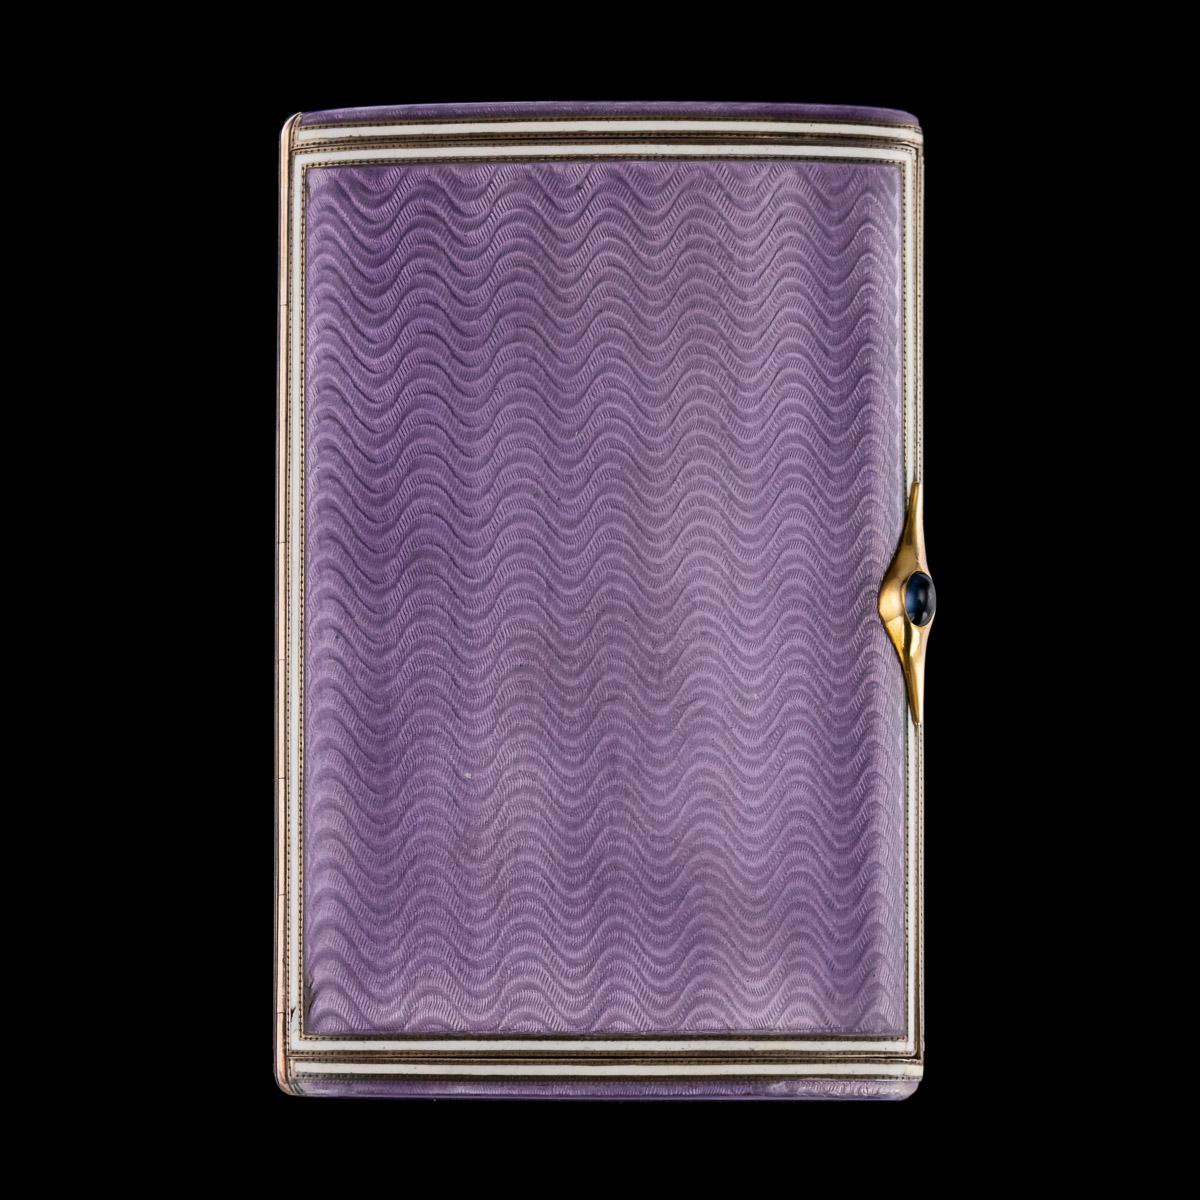 Antique early 20th century imperial Russian silver-gilt and guilloche enamel cigarette case, rectangular form with rounded corners, body enameled in translucent purple over a engine-turned ground, the gold thumb piece mounted with finely set